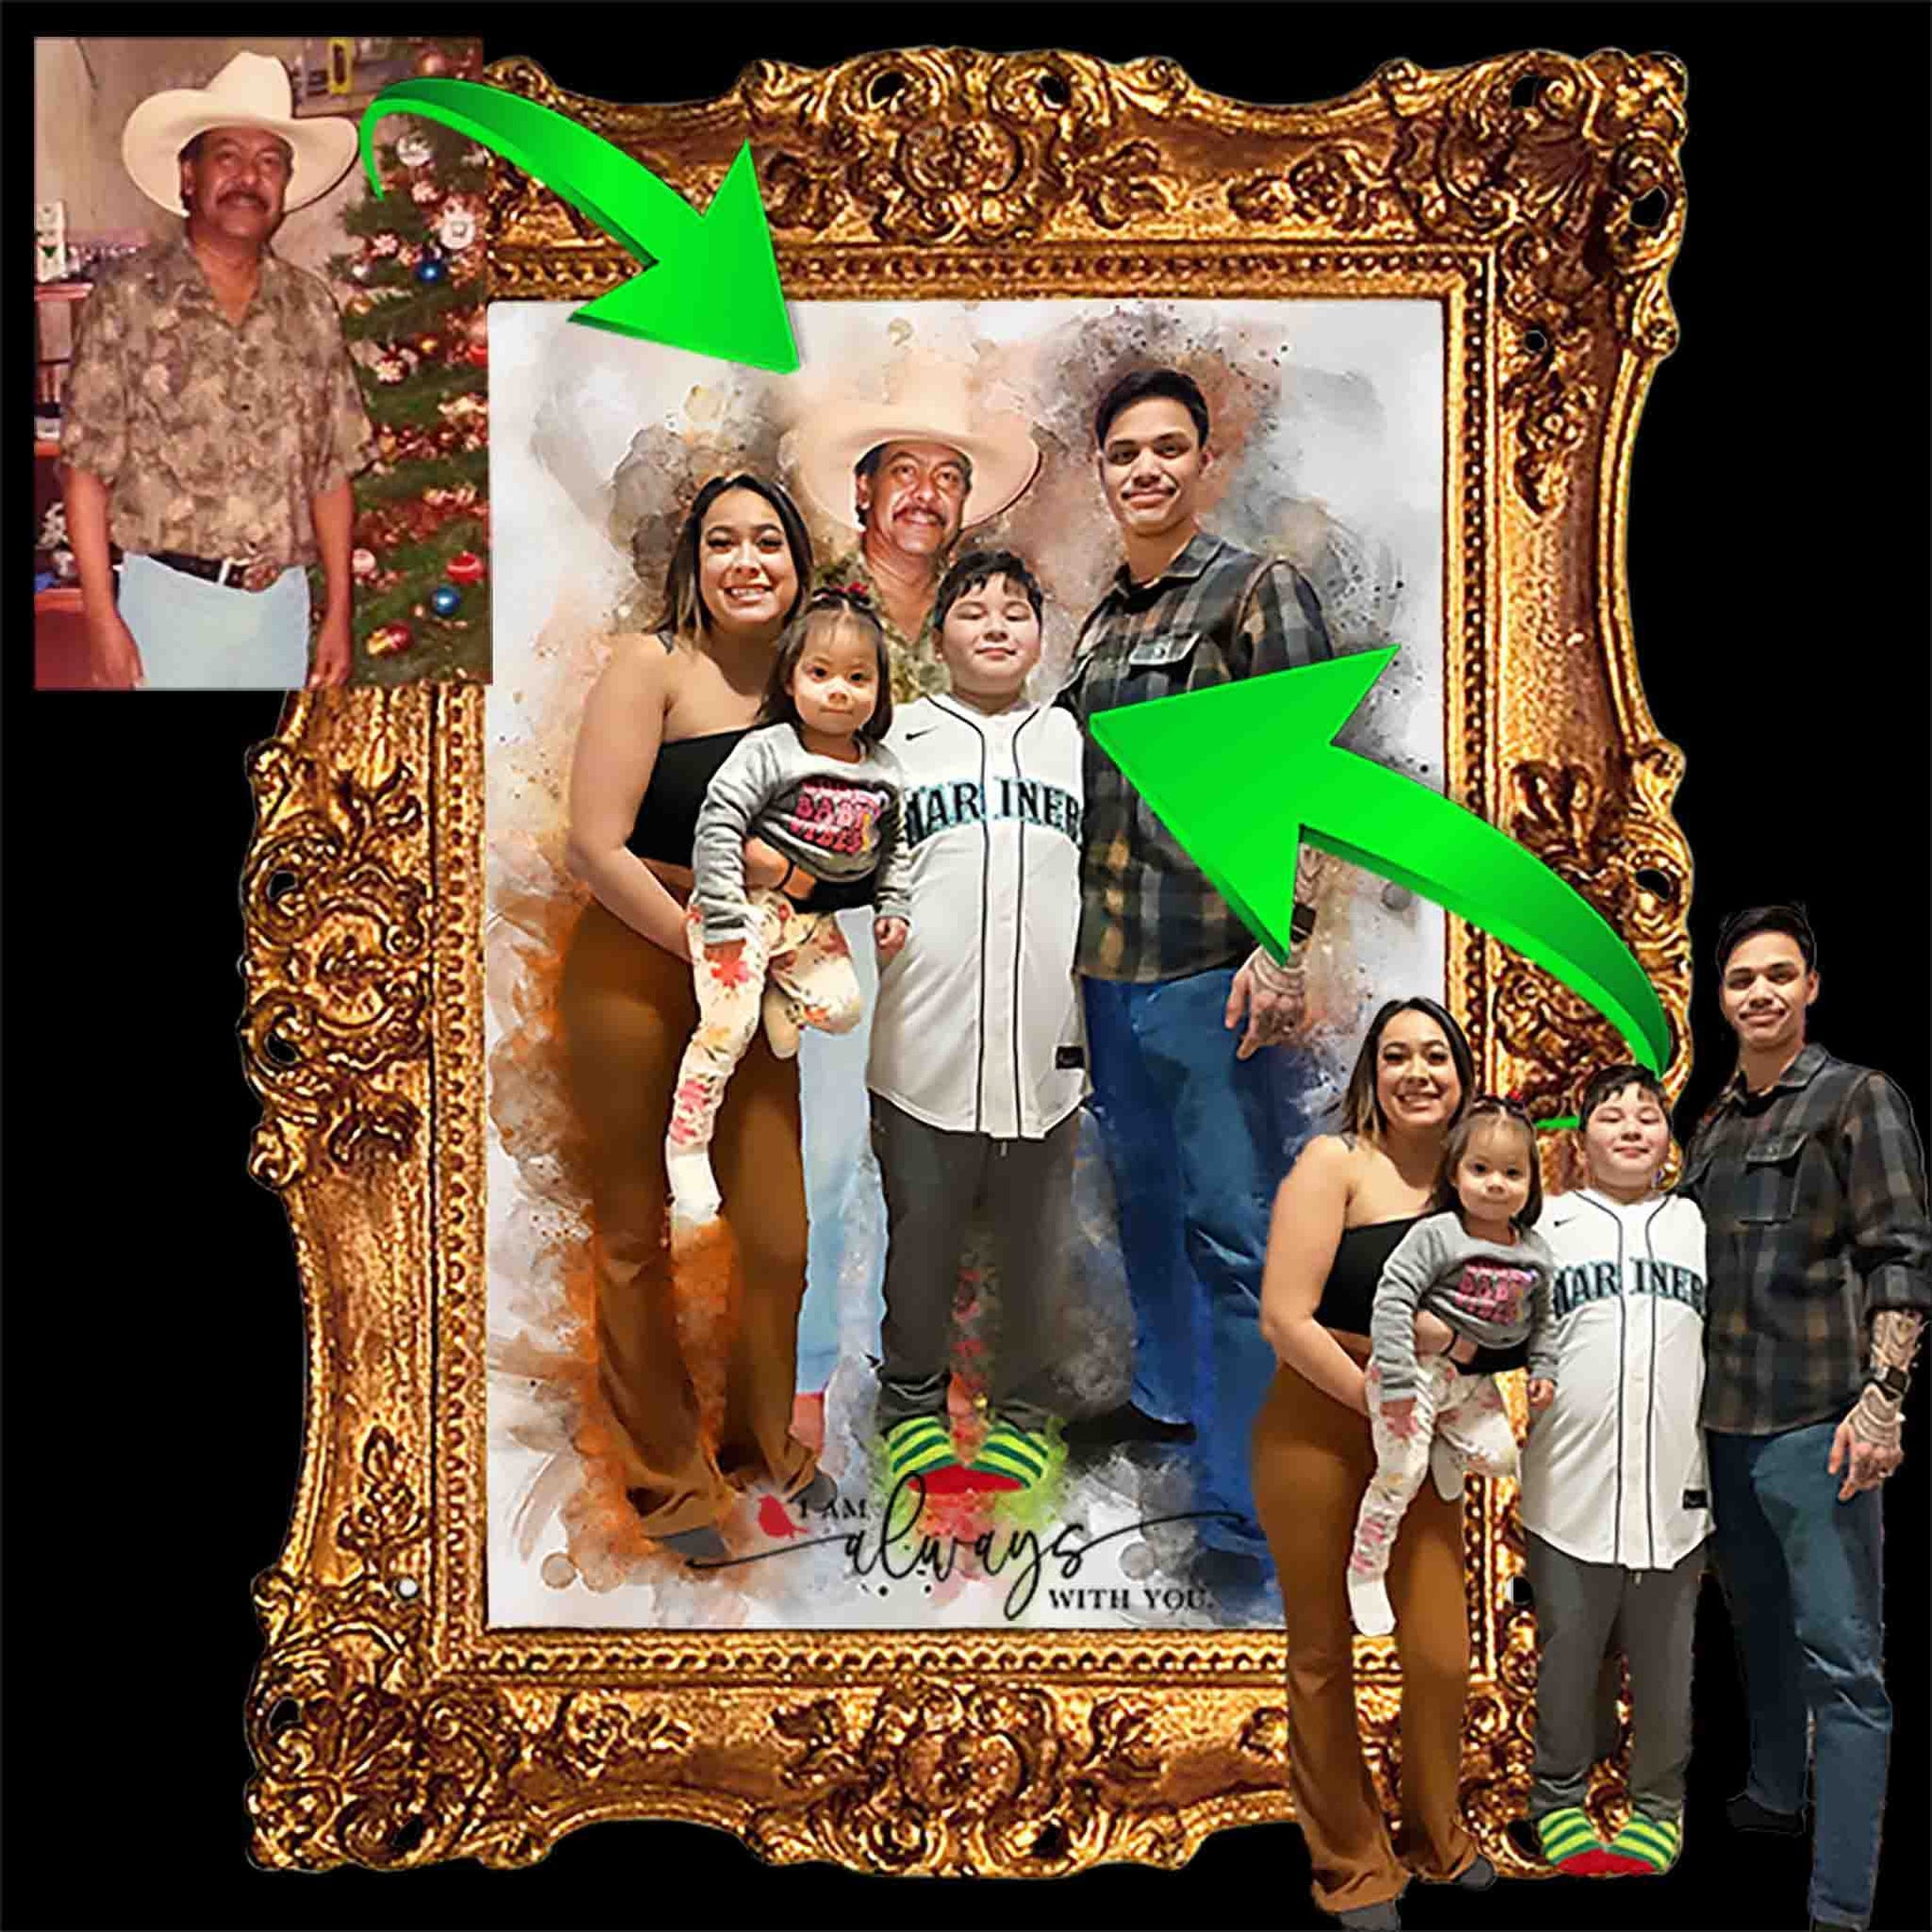 Add Lost Loved One in Family Pictures, Add Person to Photo, Add Someone into a Picture - FromPicToArt